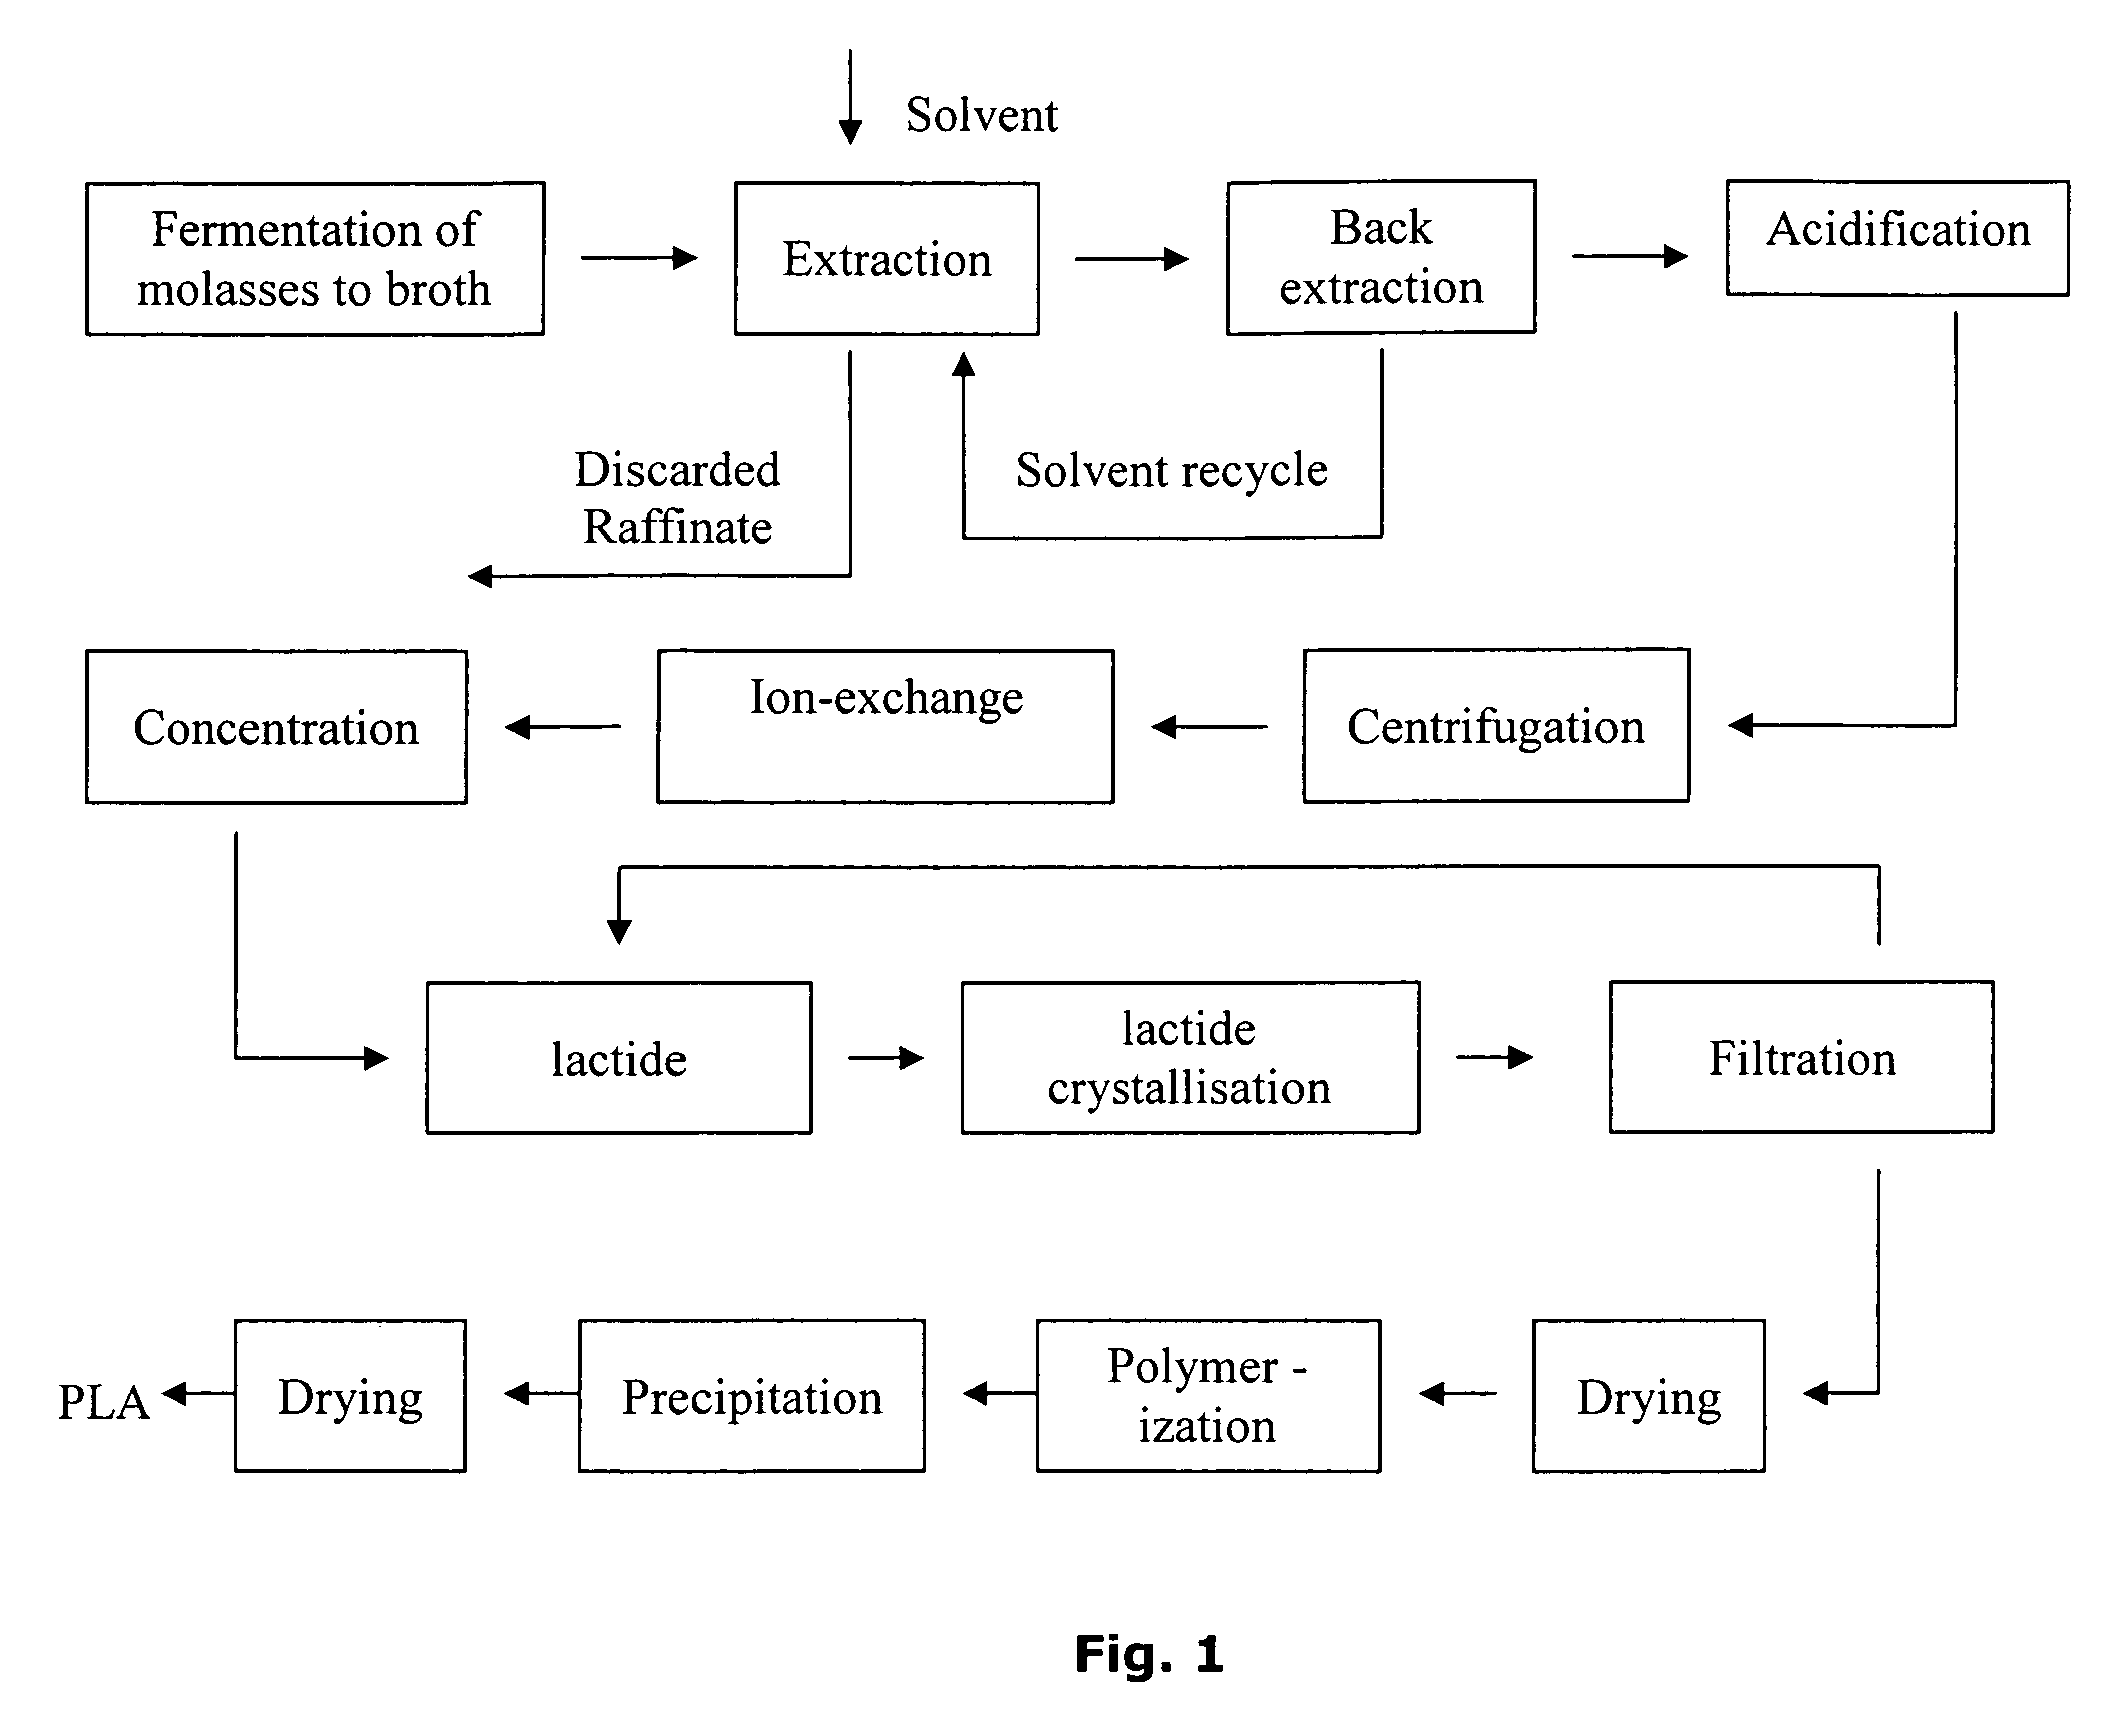 Process for the production of polylactic acid (PLA) from renewable feedstocks